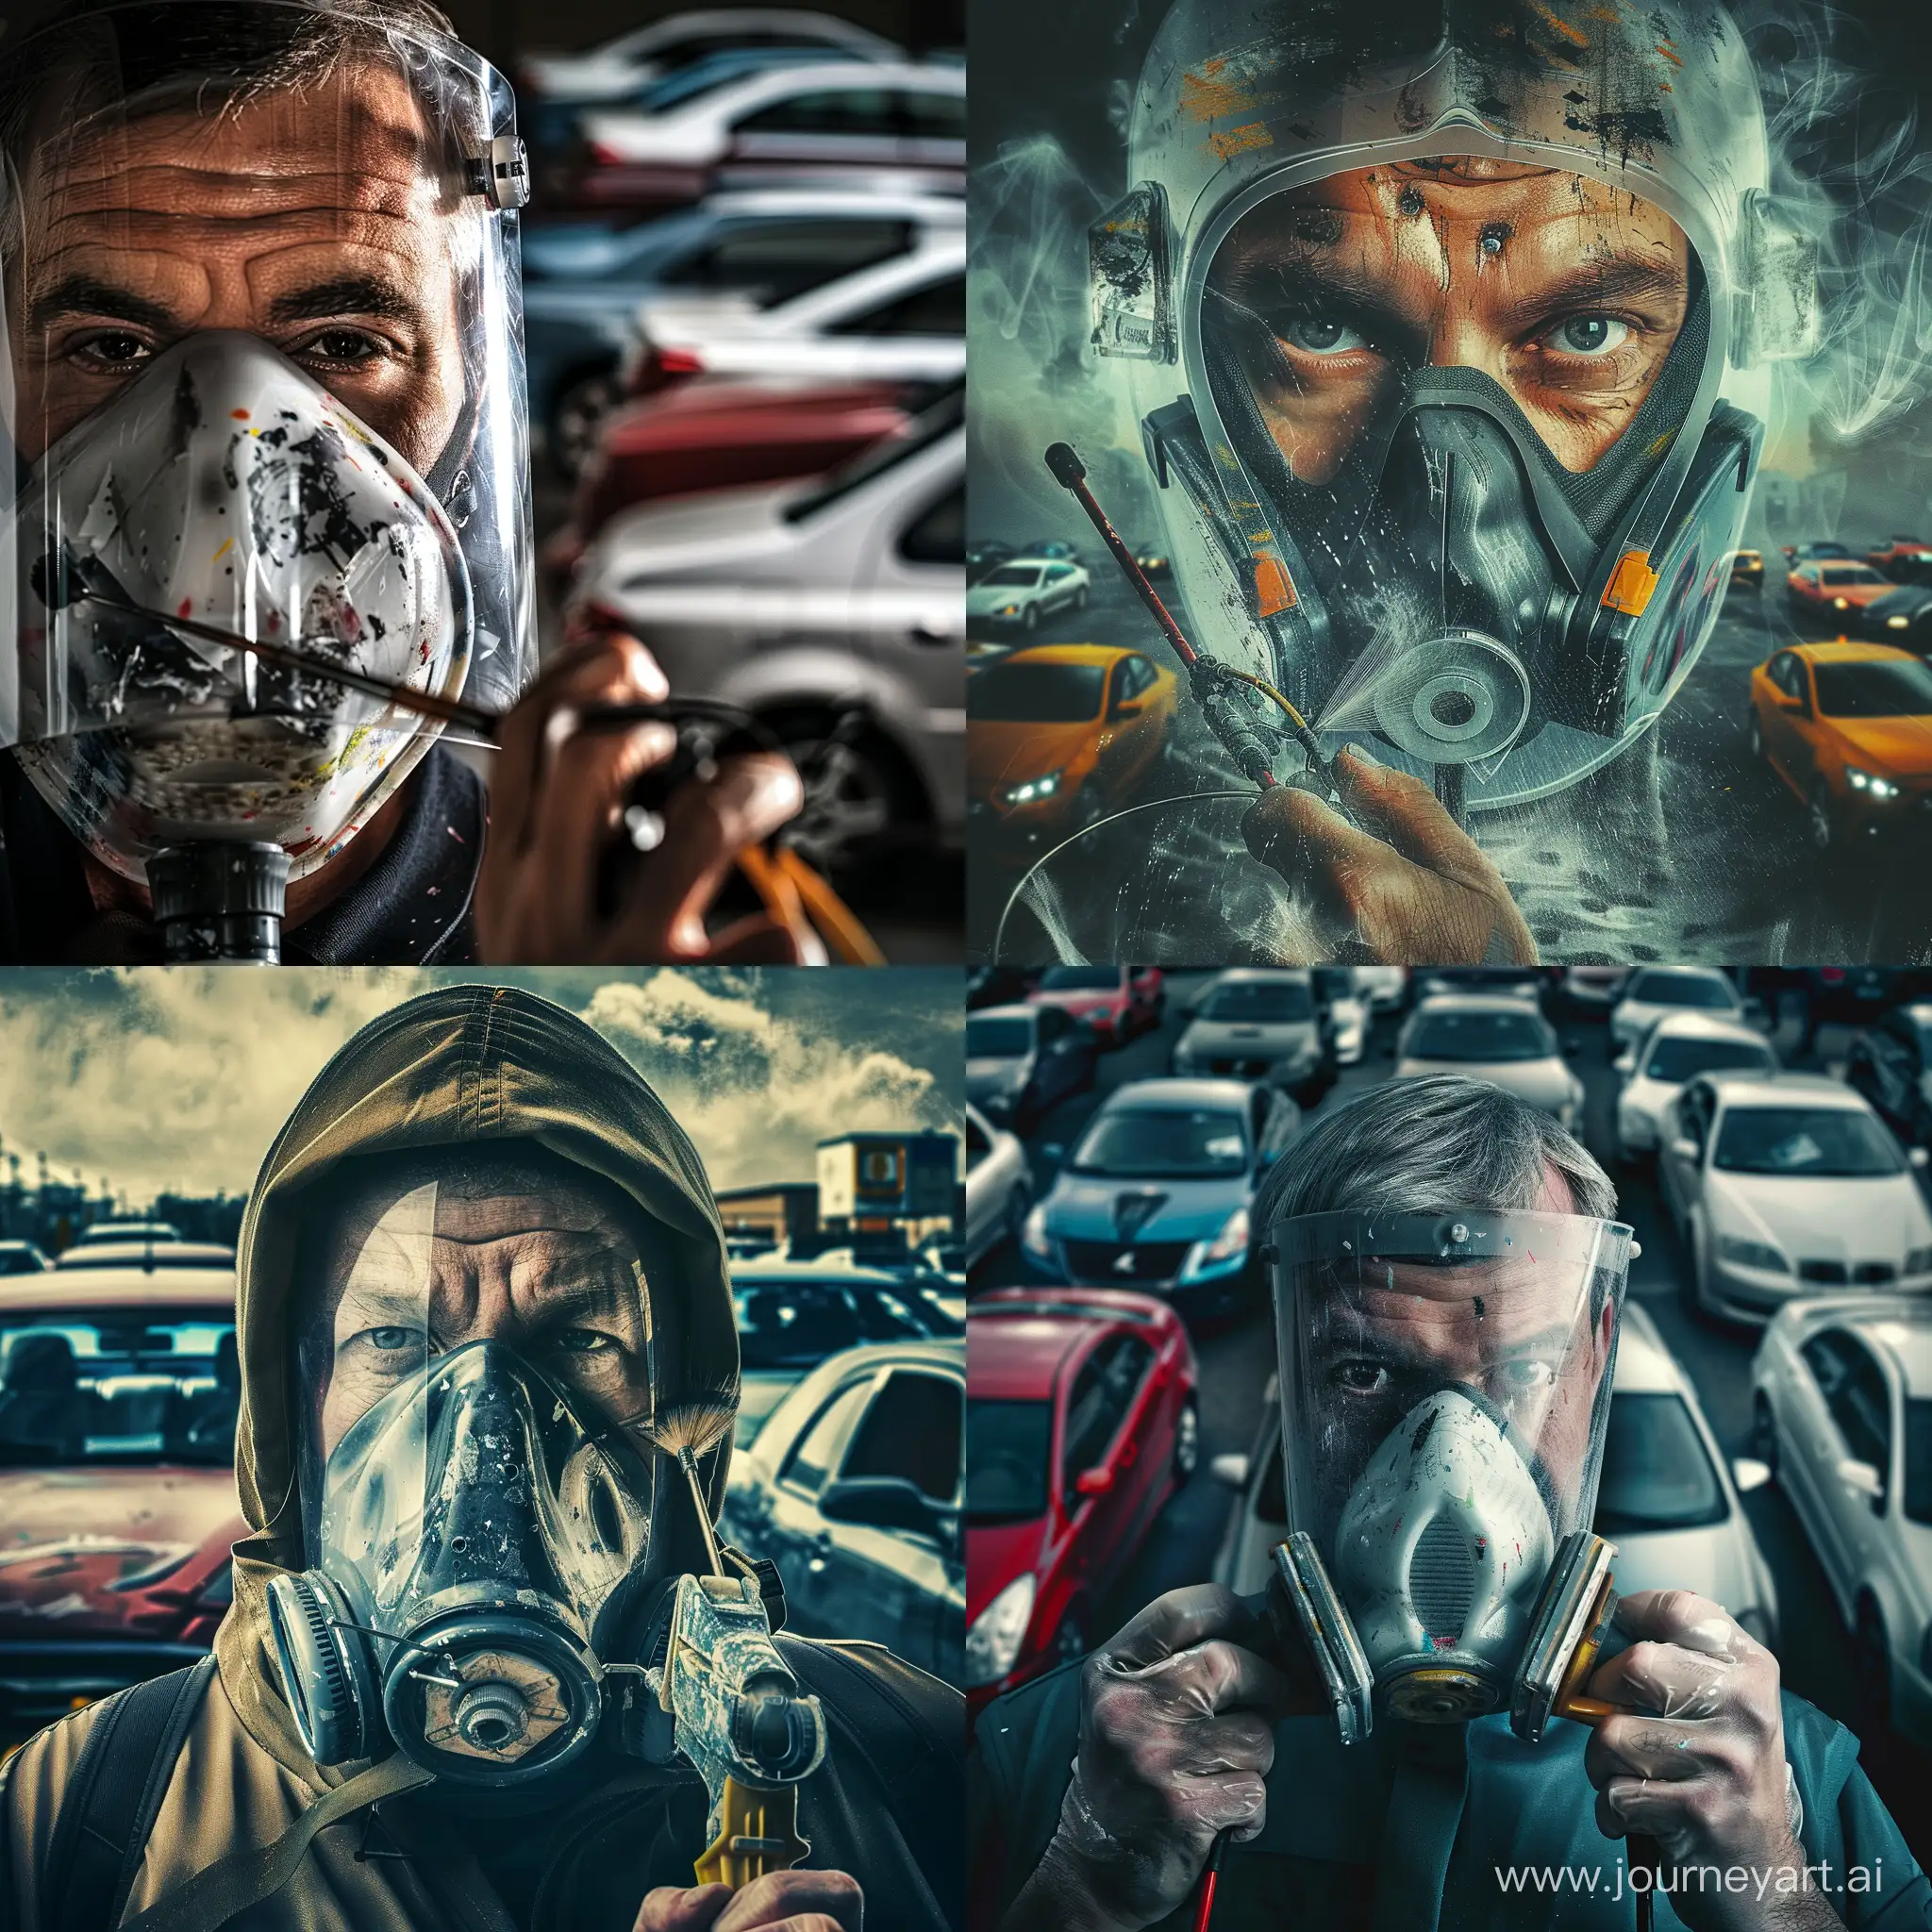 Man-in-Respirator-with-Paint-Sprayer-amidst-Cars